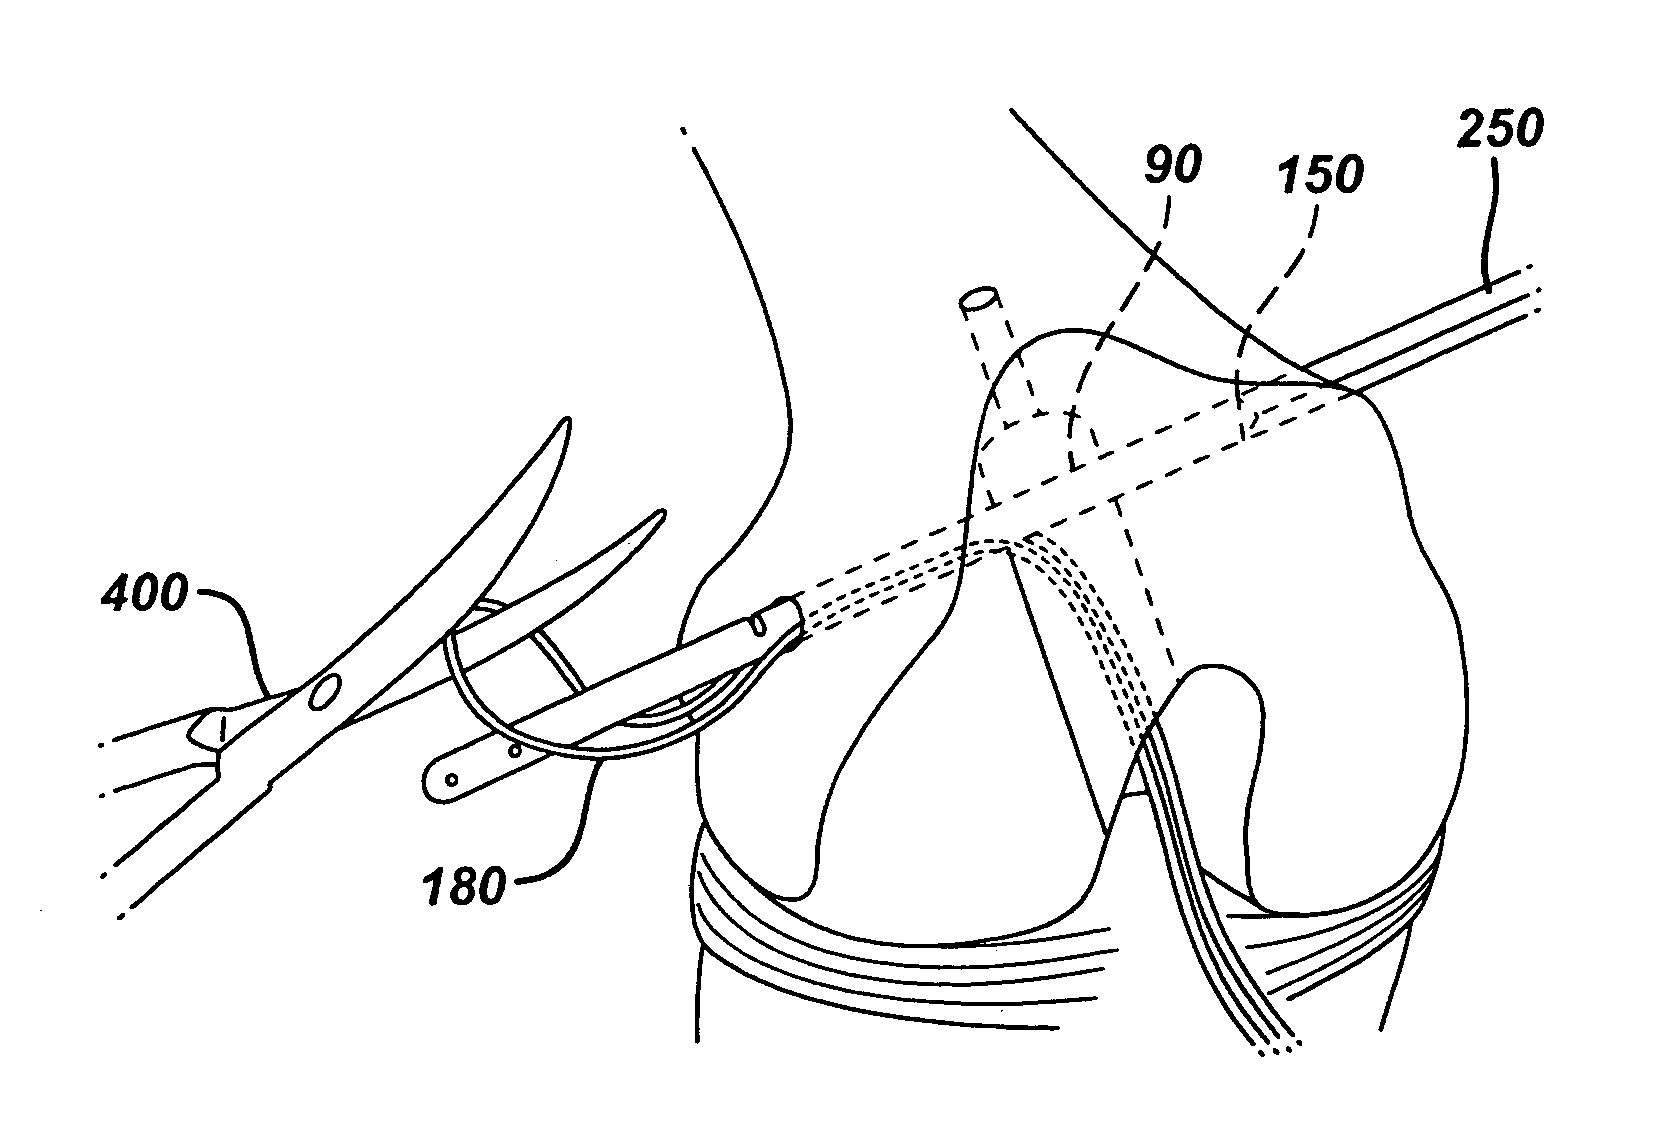 Method of replacing an anterior cruciate ligament in the knee